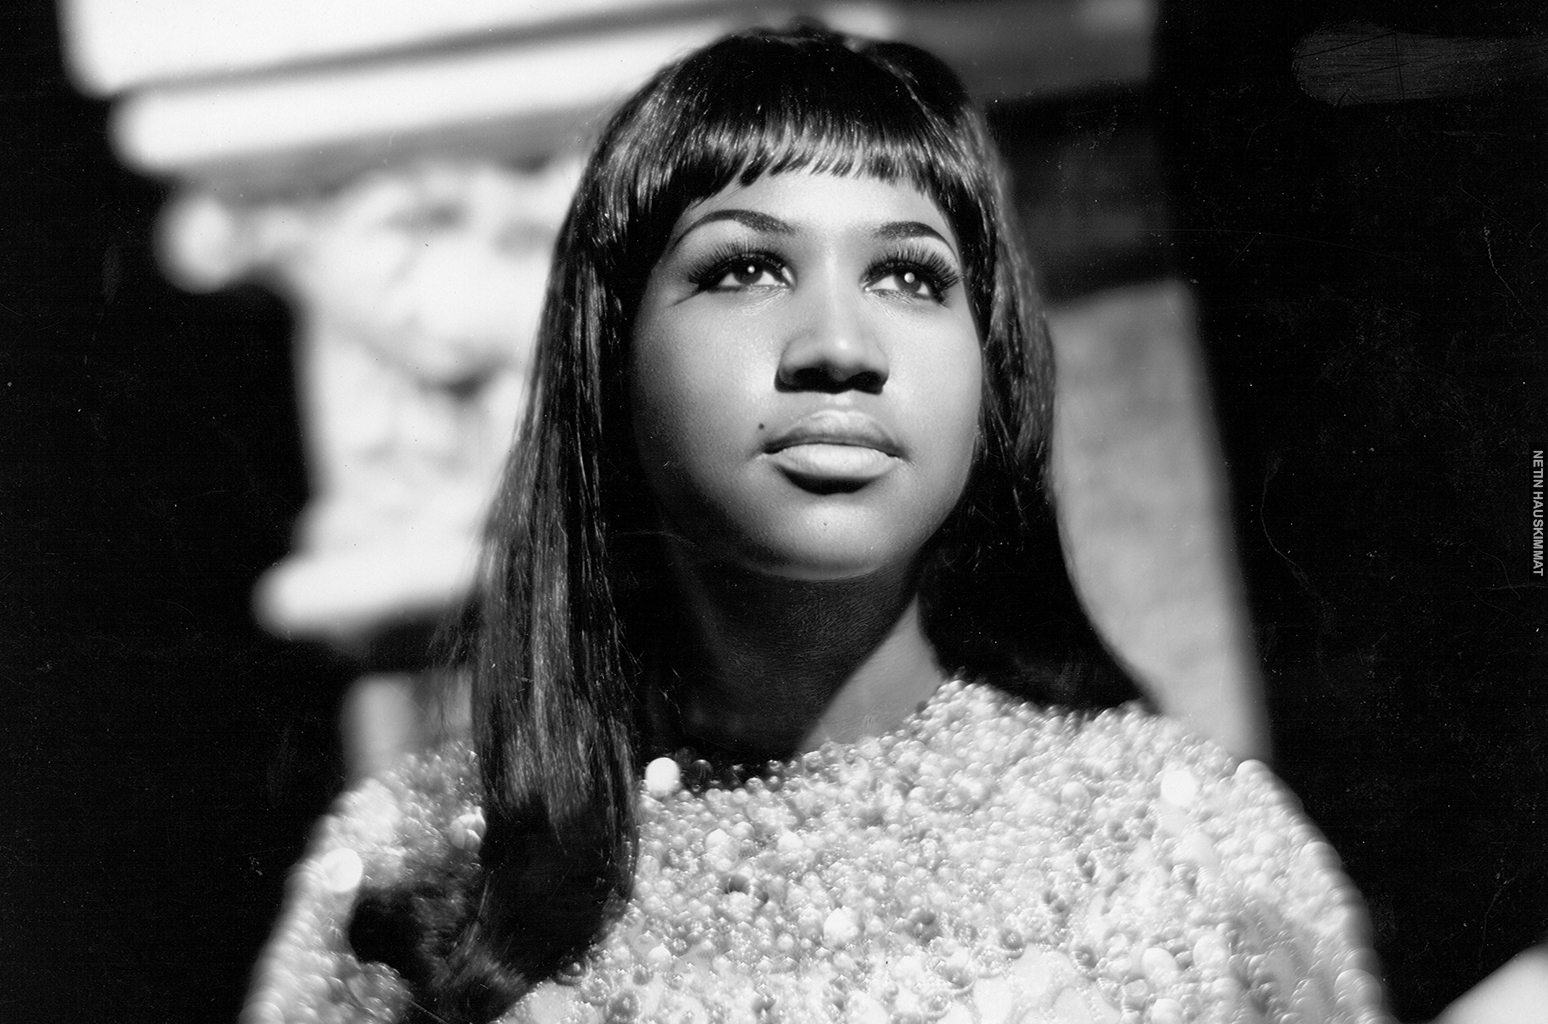 1967- Aretha Franklin “Respect” ruled the Billboard charts in 1967, which was just one of the hits she released that year.